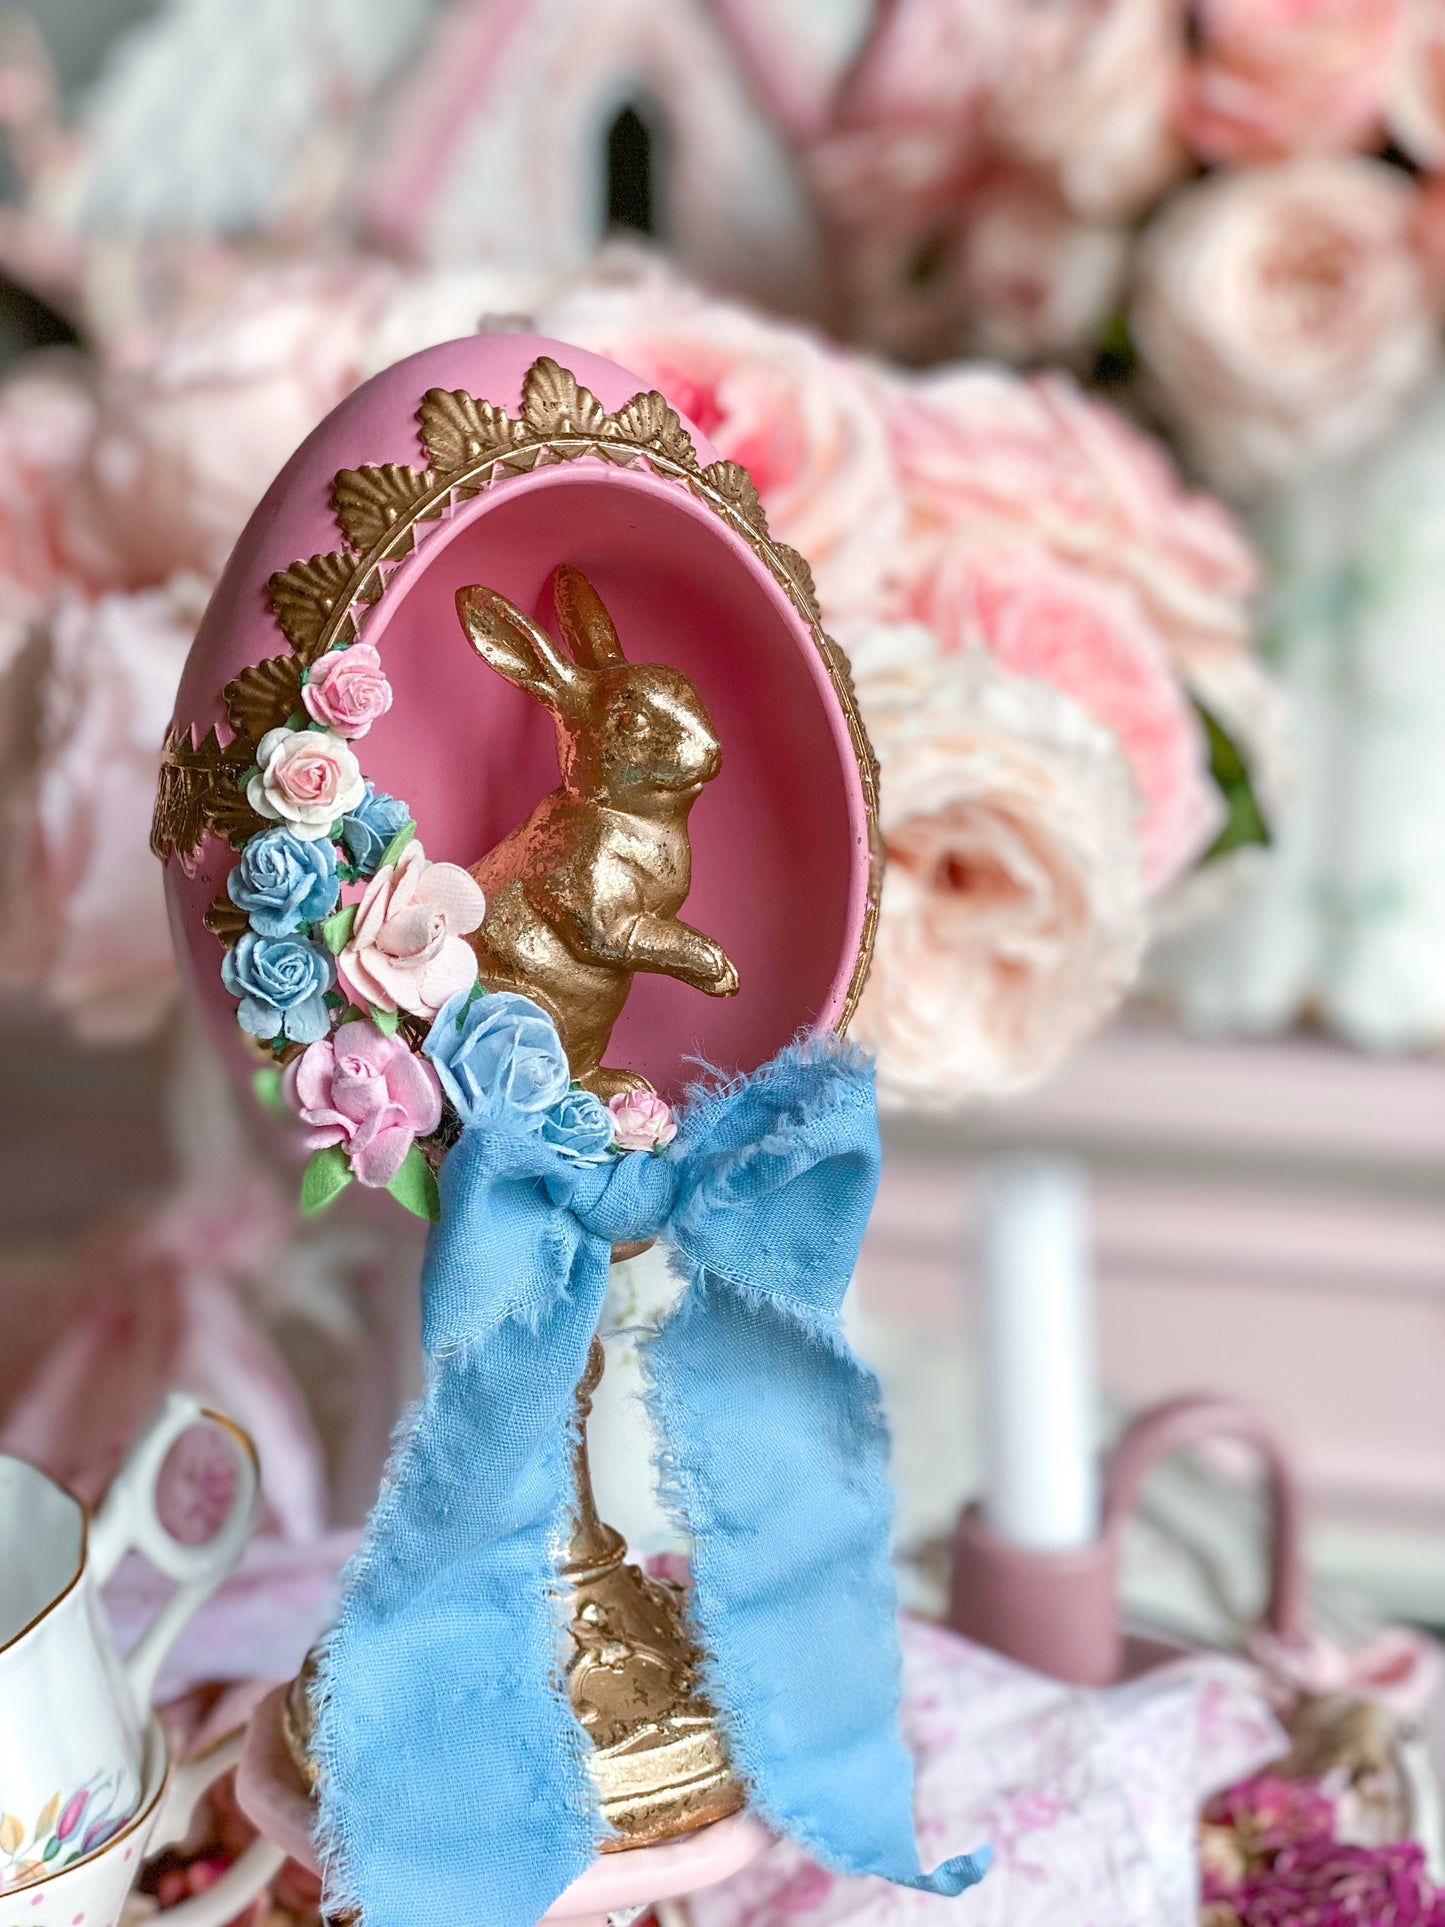 Bespoke Pastel Pink, Blue and Gold Shabby Chic Egg Finial with Easter Bunny